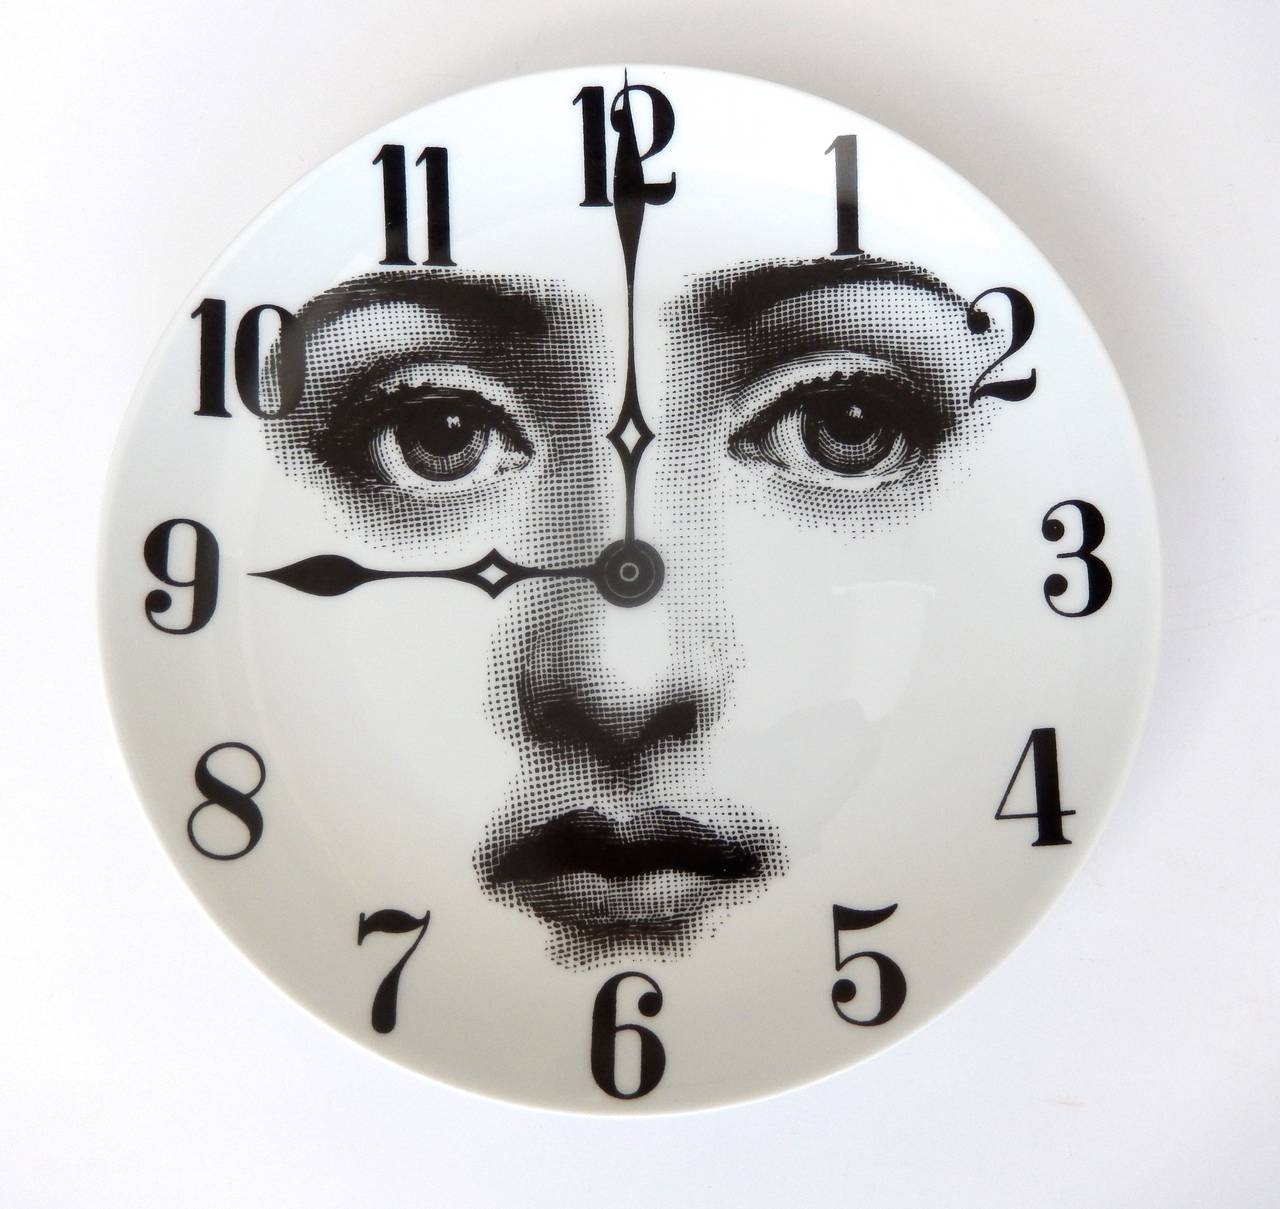 An early production plate by Fornasetti of his muse Lina Cavalieri, depicted as the face of a clock.  Whimsical, surreal design as is typical of the best of Fornasetti's graphic images.  A similar plate is illustrated on p. 198 in Fornasetti